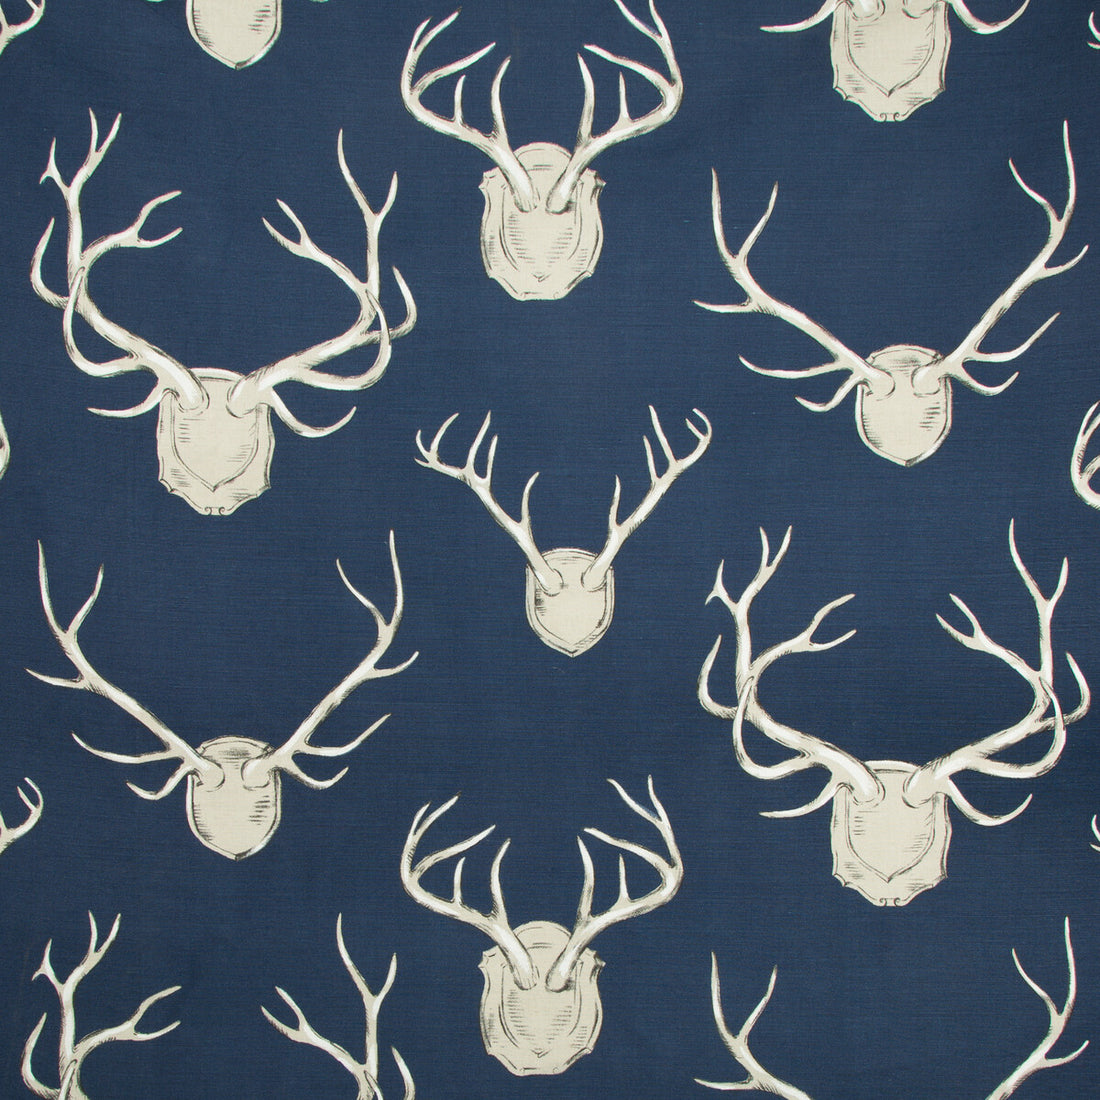 Antlers fabric in navy color - pattern 2009143.50.0 - by Lee Jofa in the Lodge II Prints collection